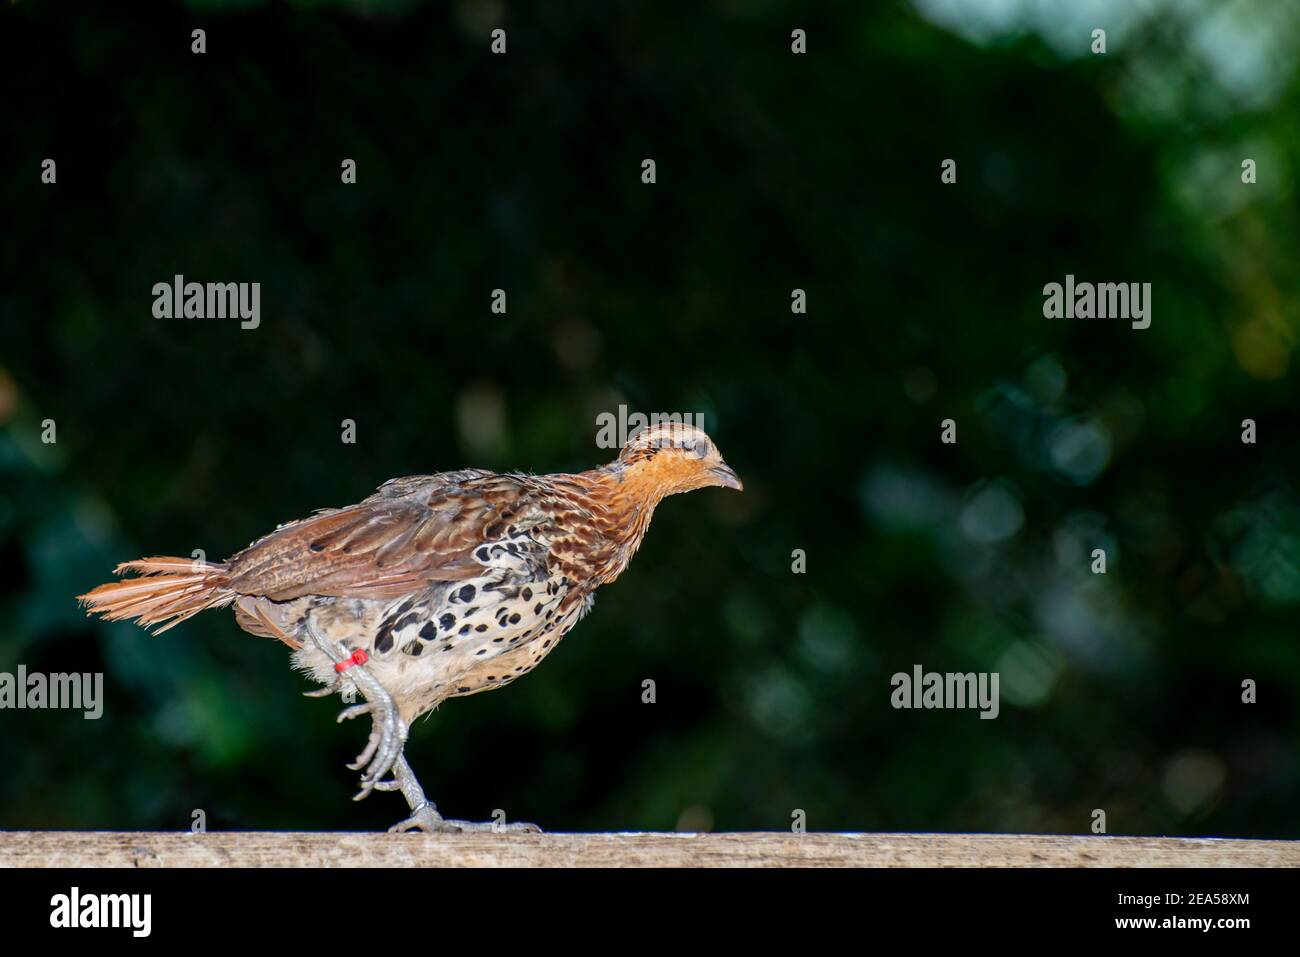 Apple Valley, Minnesota.  A banded Mountain Bamboo-partridge, Bambusicola fytchii walking on a fence railing. Stock Photo